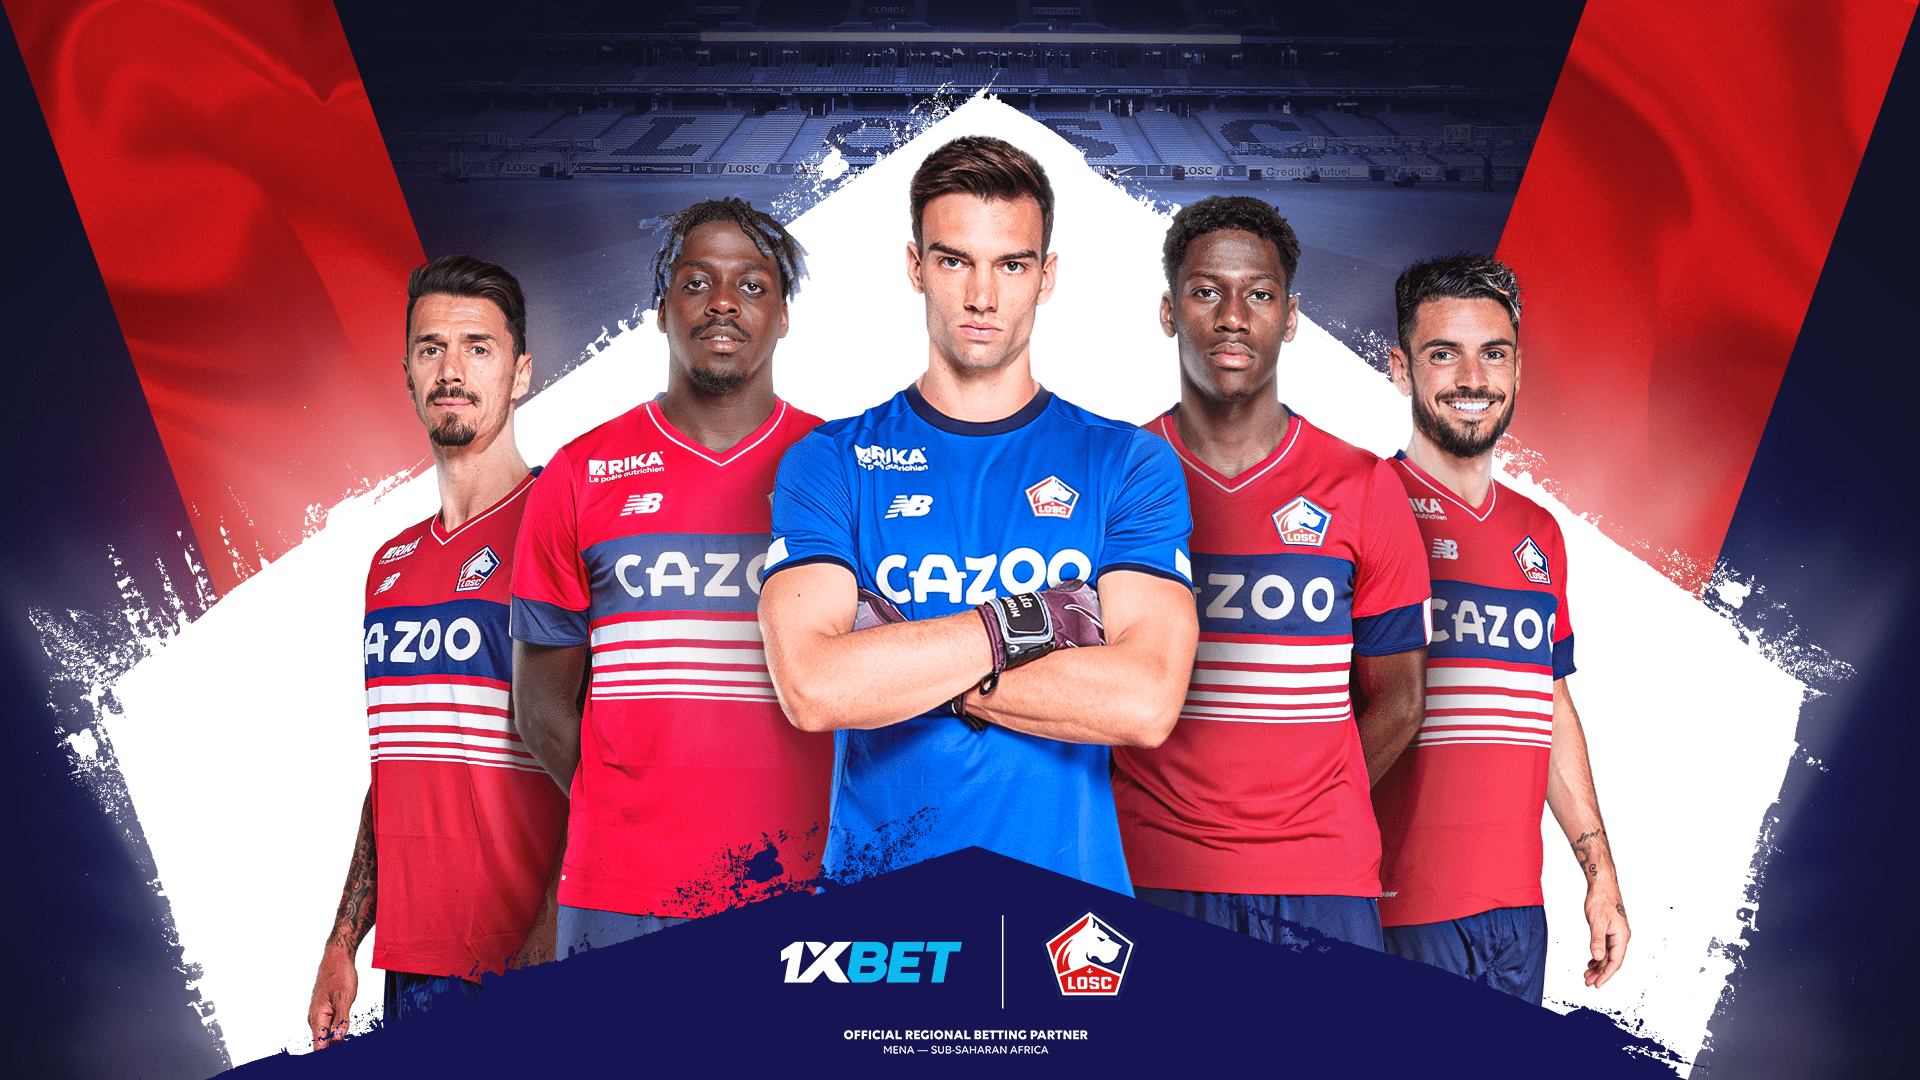 1xBet is the new Official Regional Partner of LOSC Lille